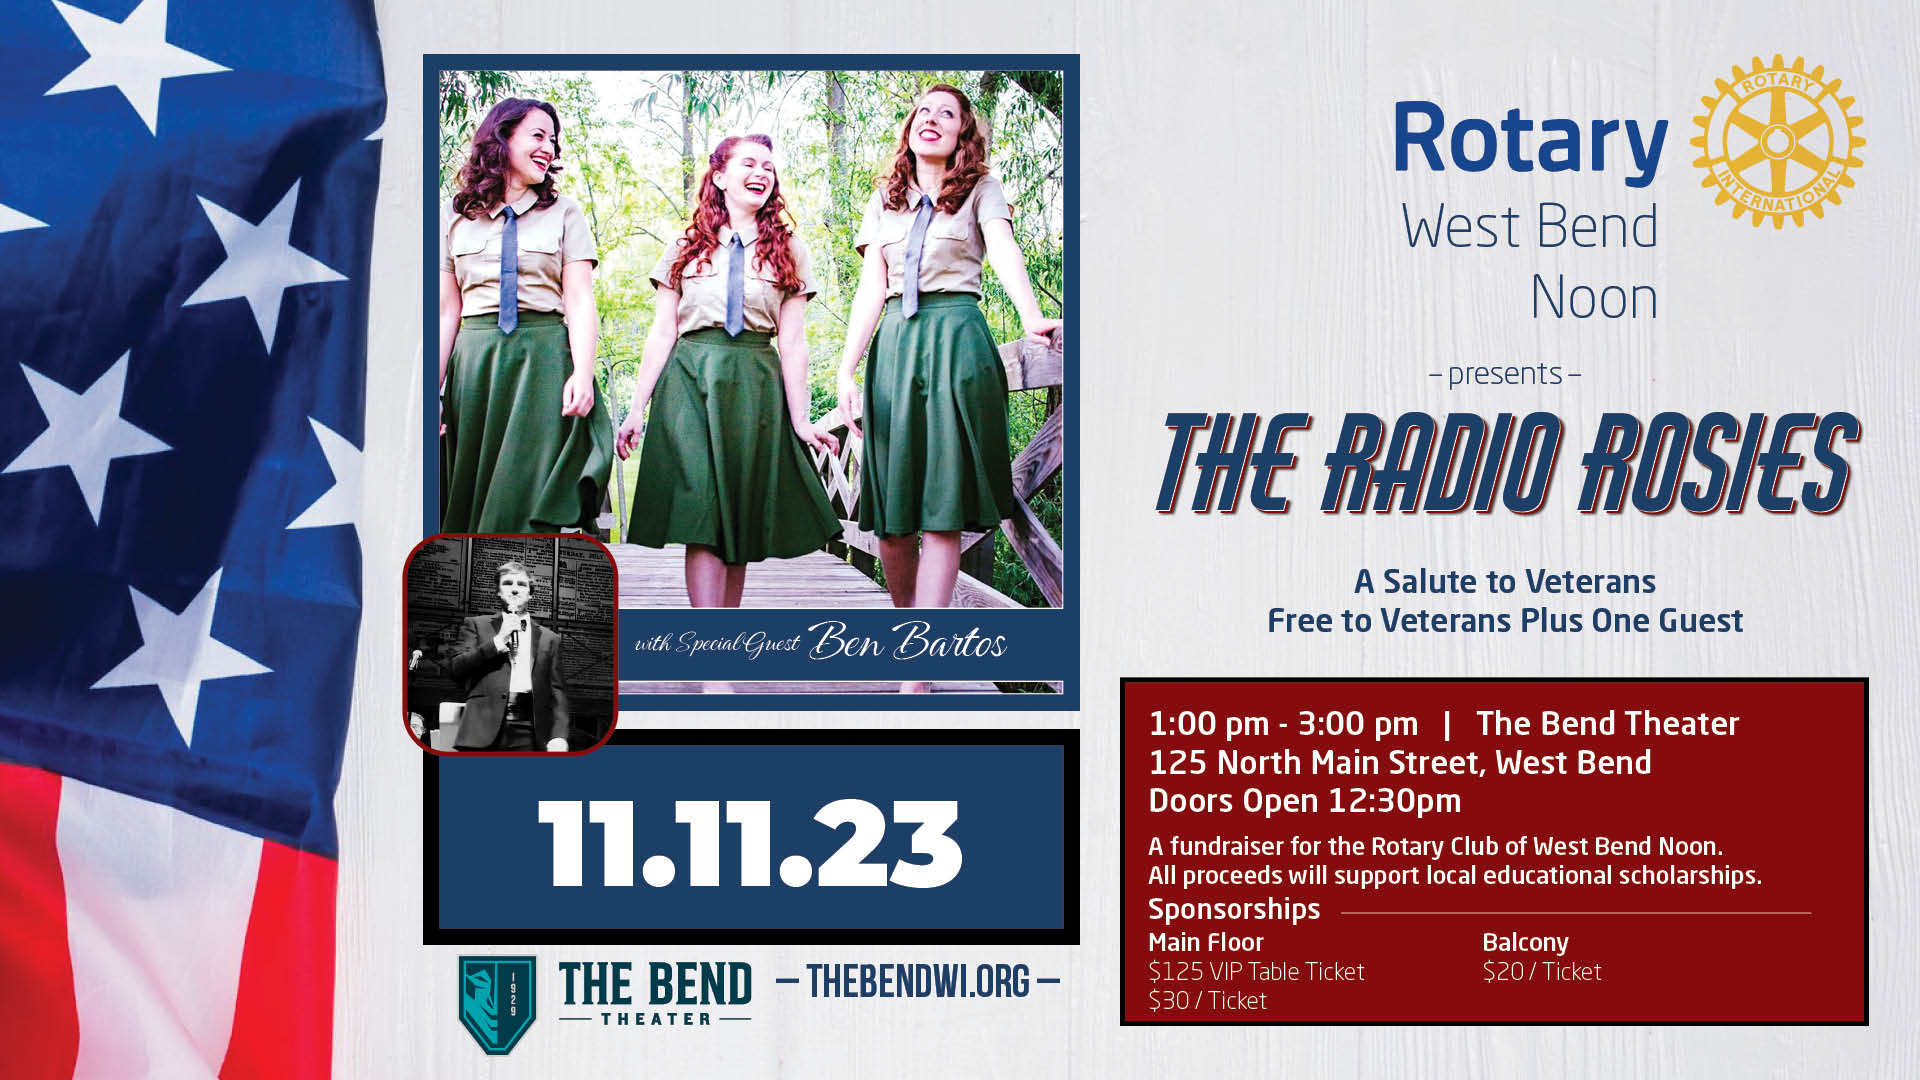 The Radio Rosies: A Salute to Veterans